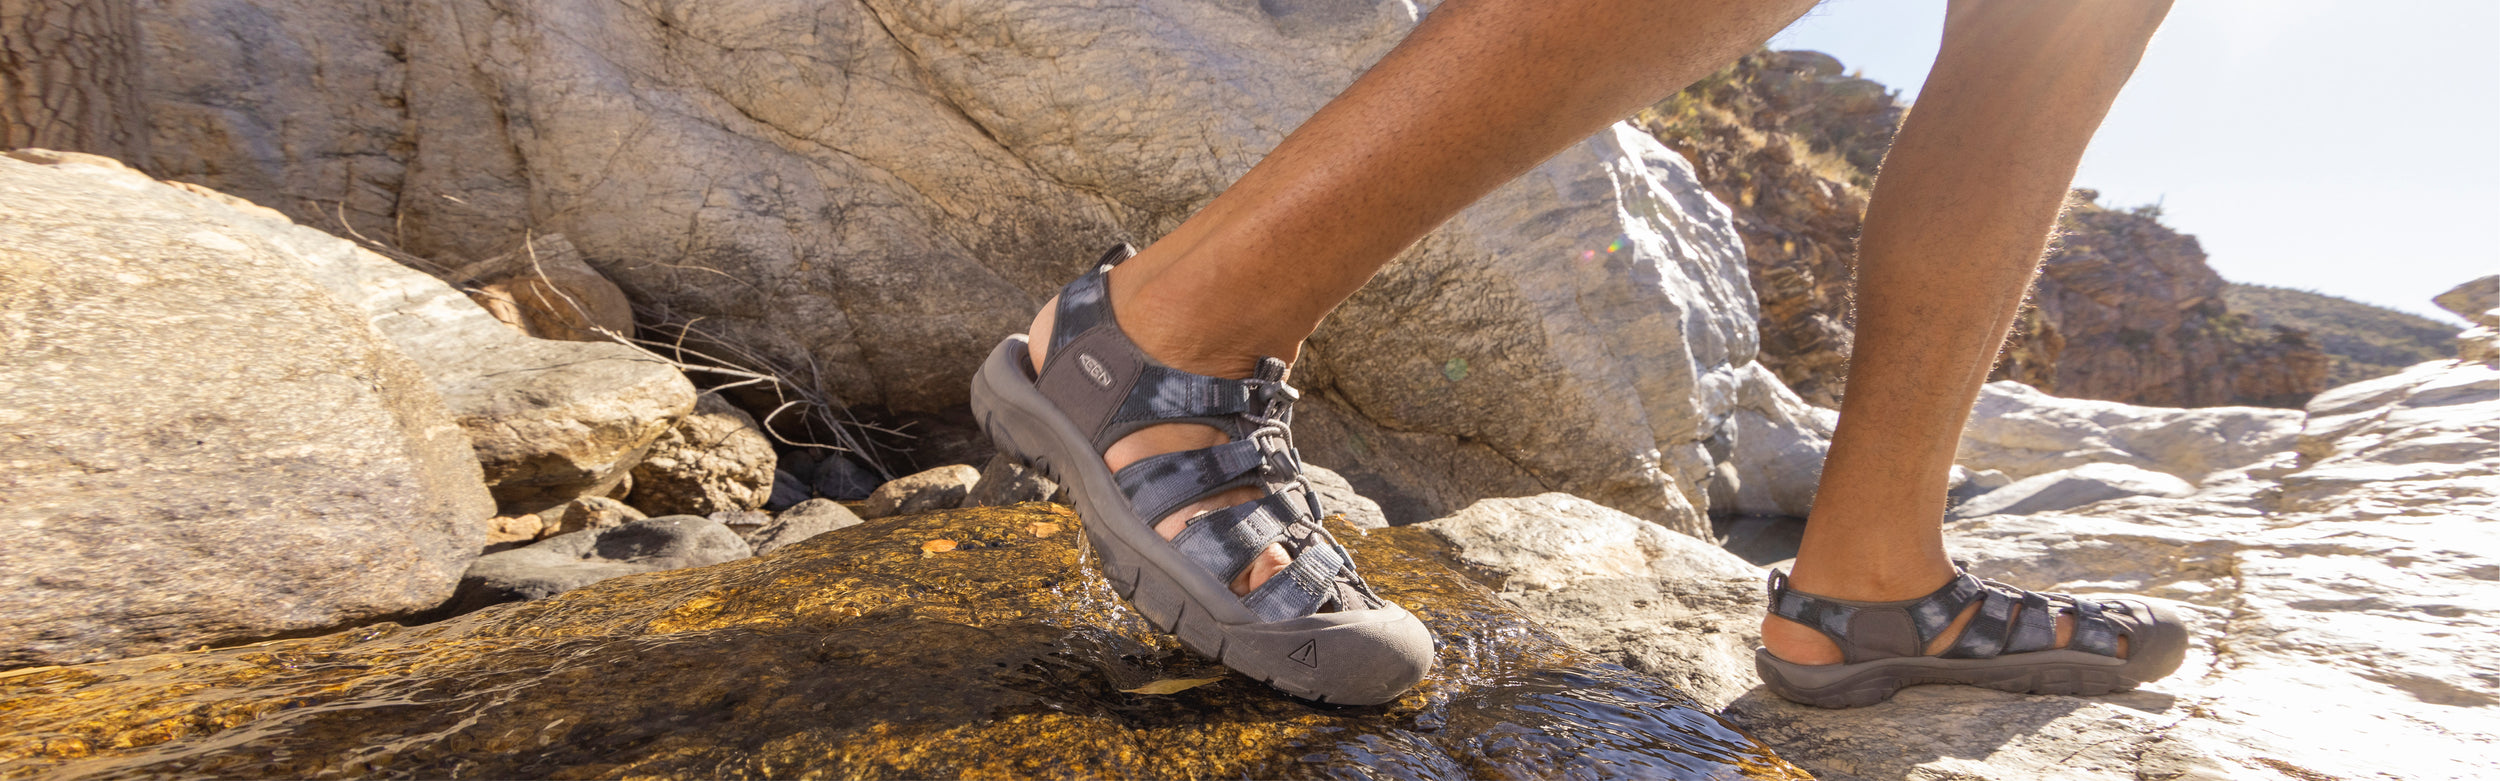 Outdoors Oriented - Quality outdoor equipment, footwear & clothing.